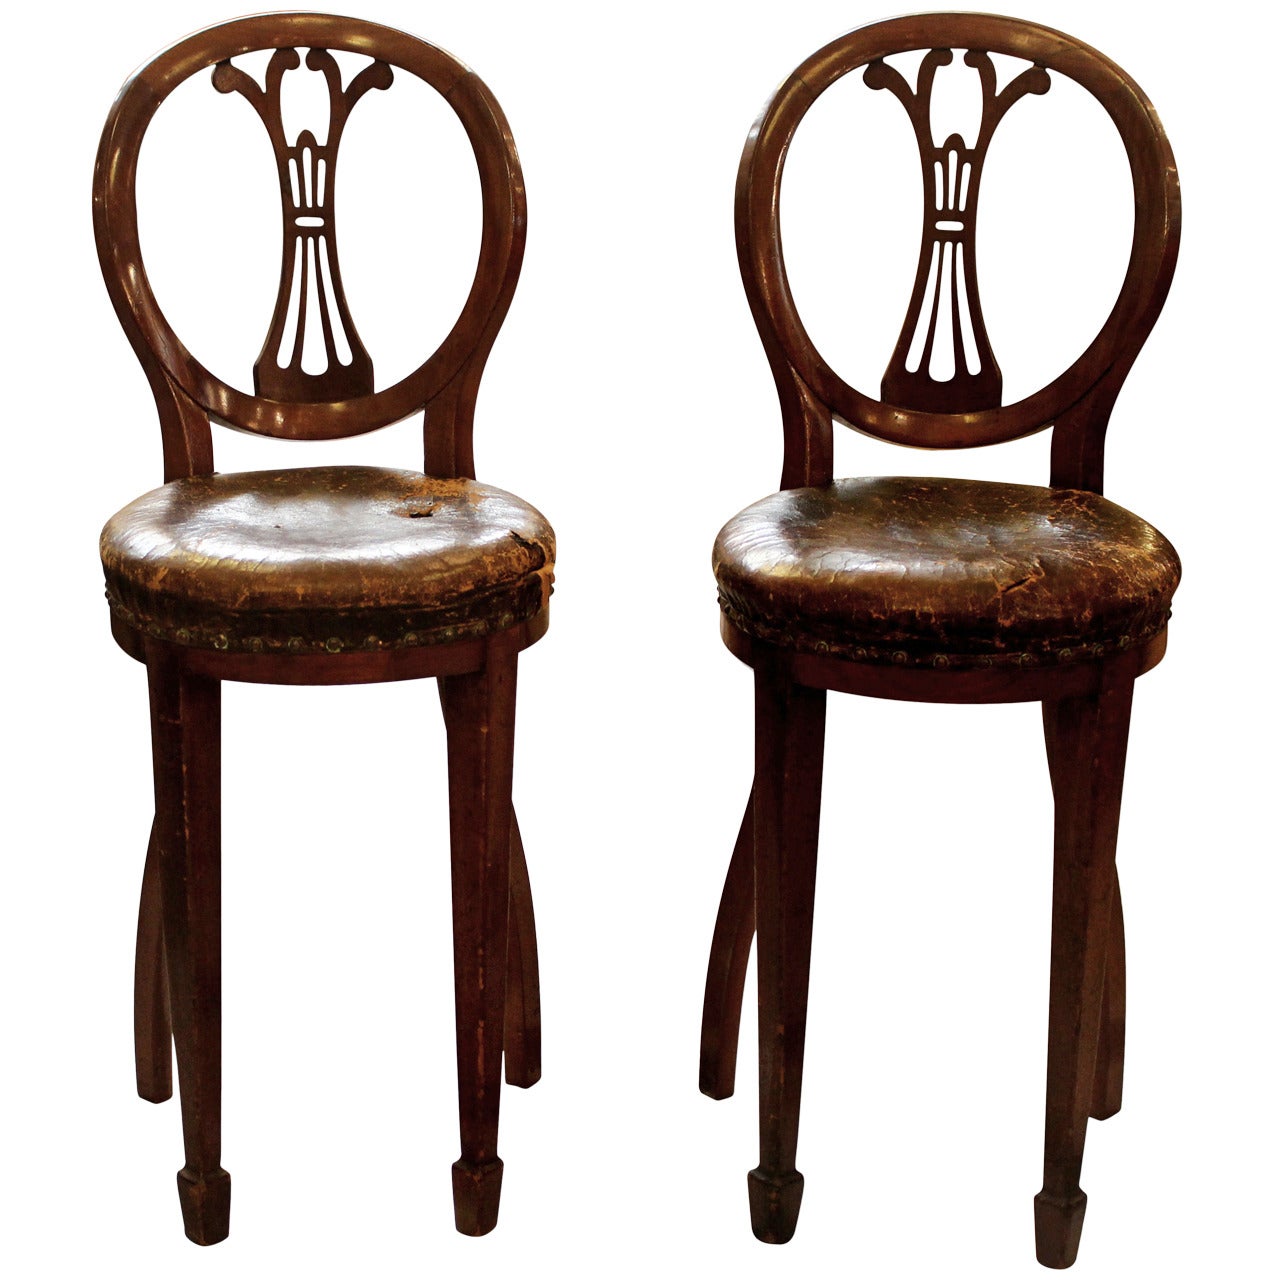 Pair of Matching Olde English Chairs